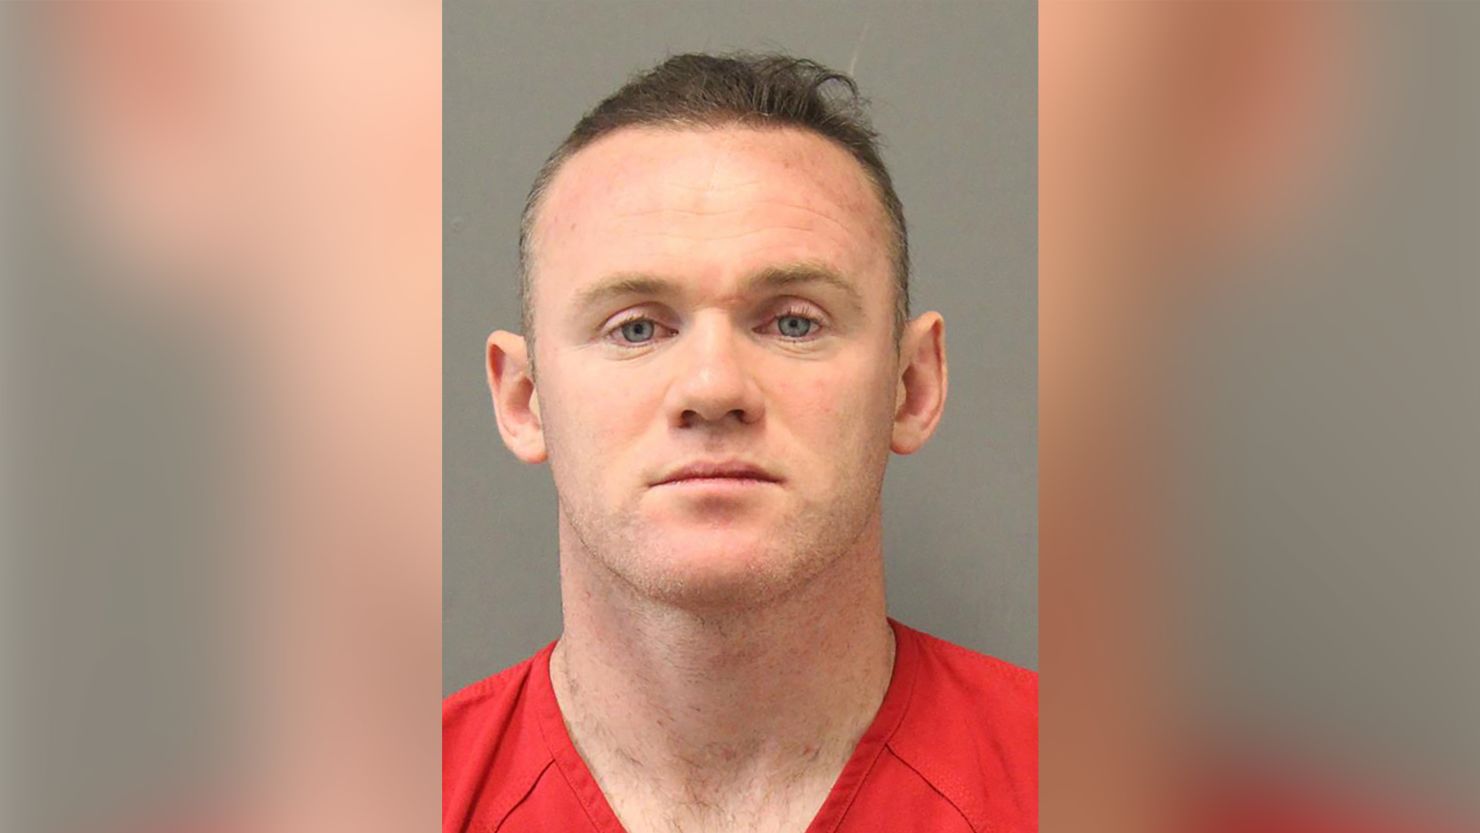 Wayne Rooney was accused of public intoxication and taken into custody on December 16, 2018, in Virginia, officials said.